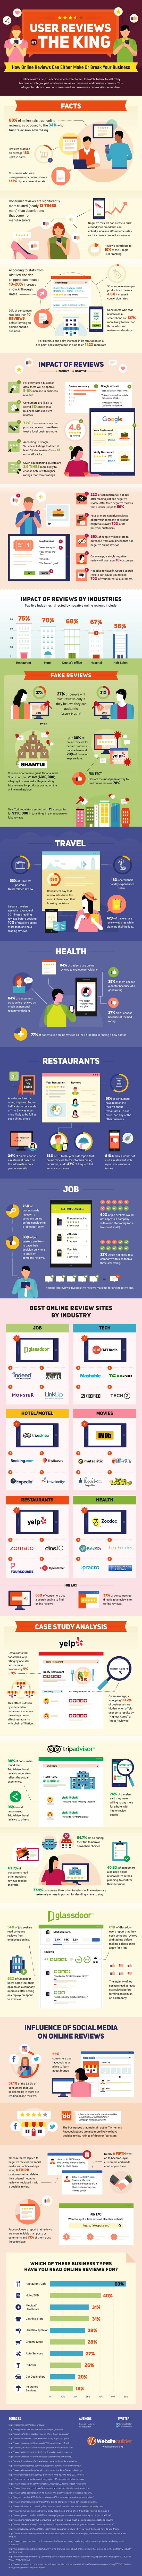 online review infographic by websitebuilder.org